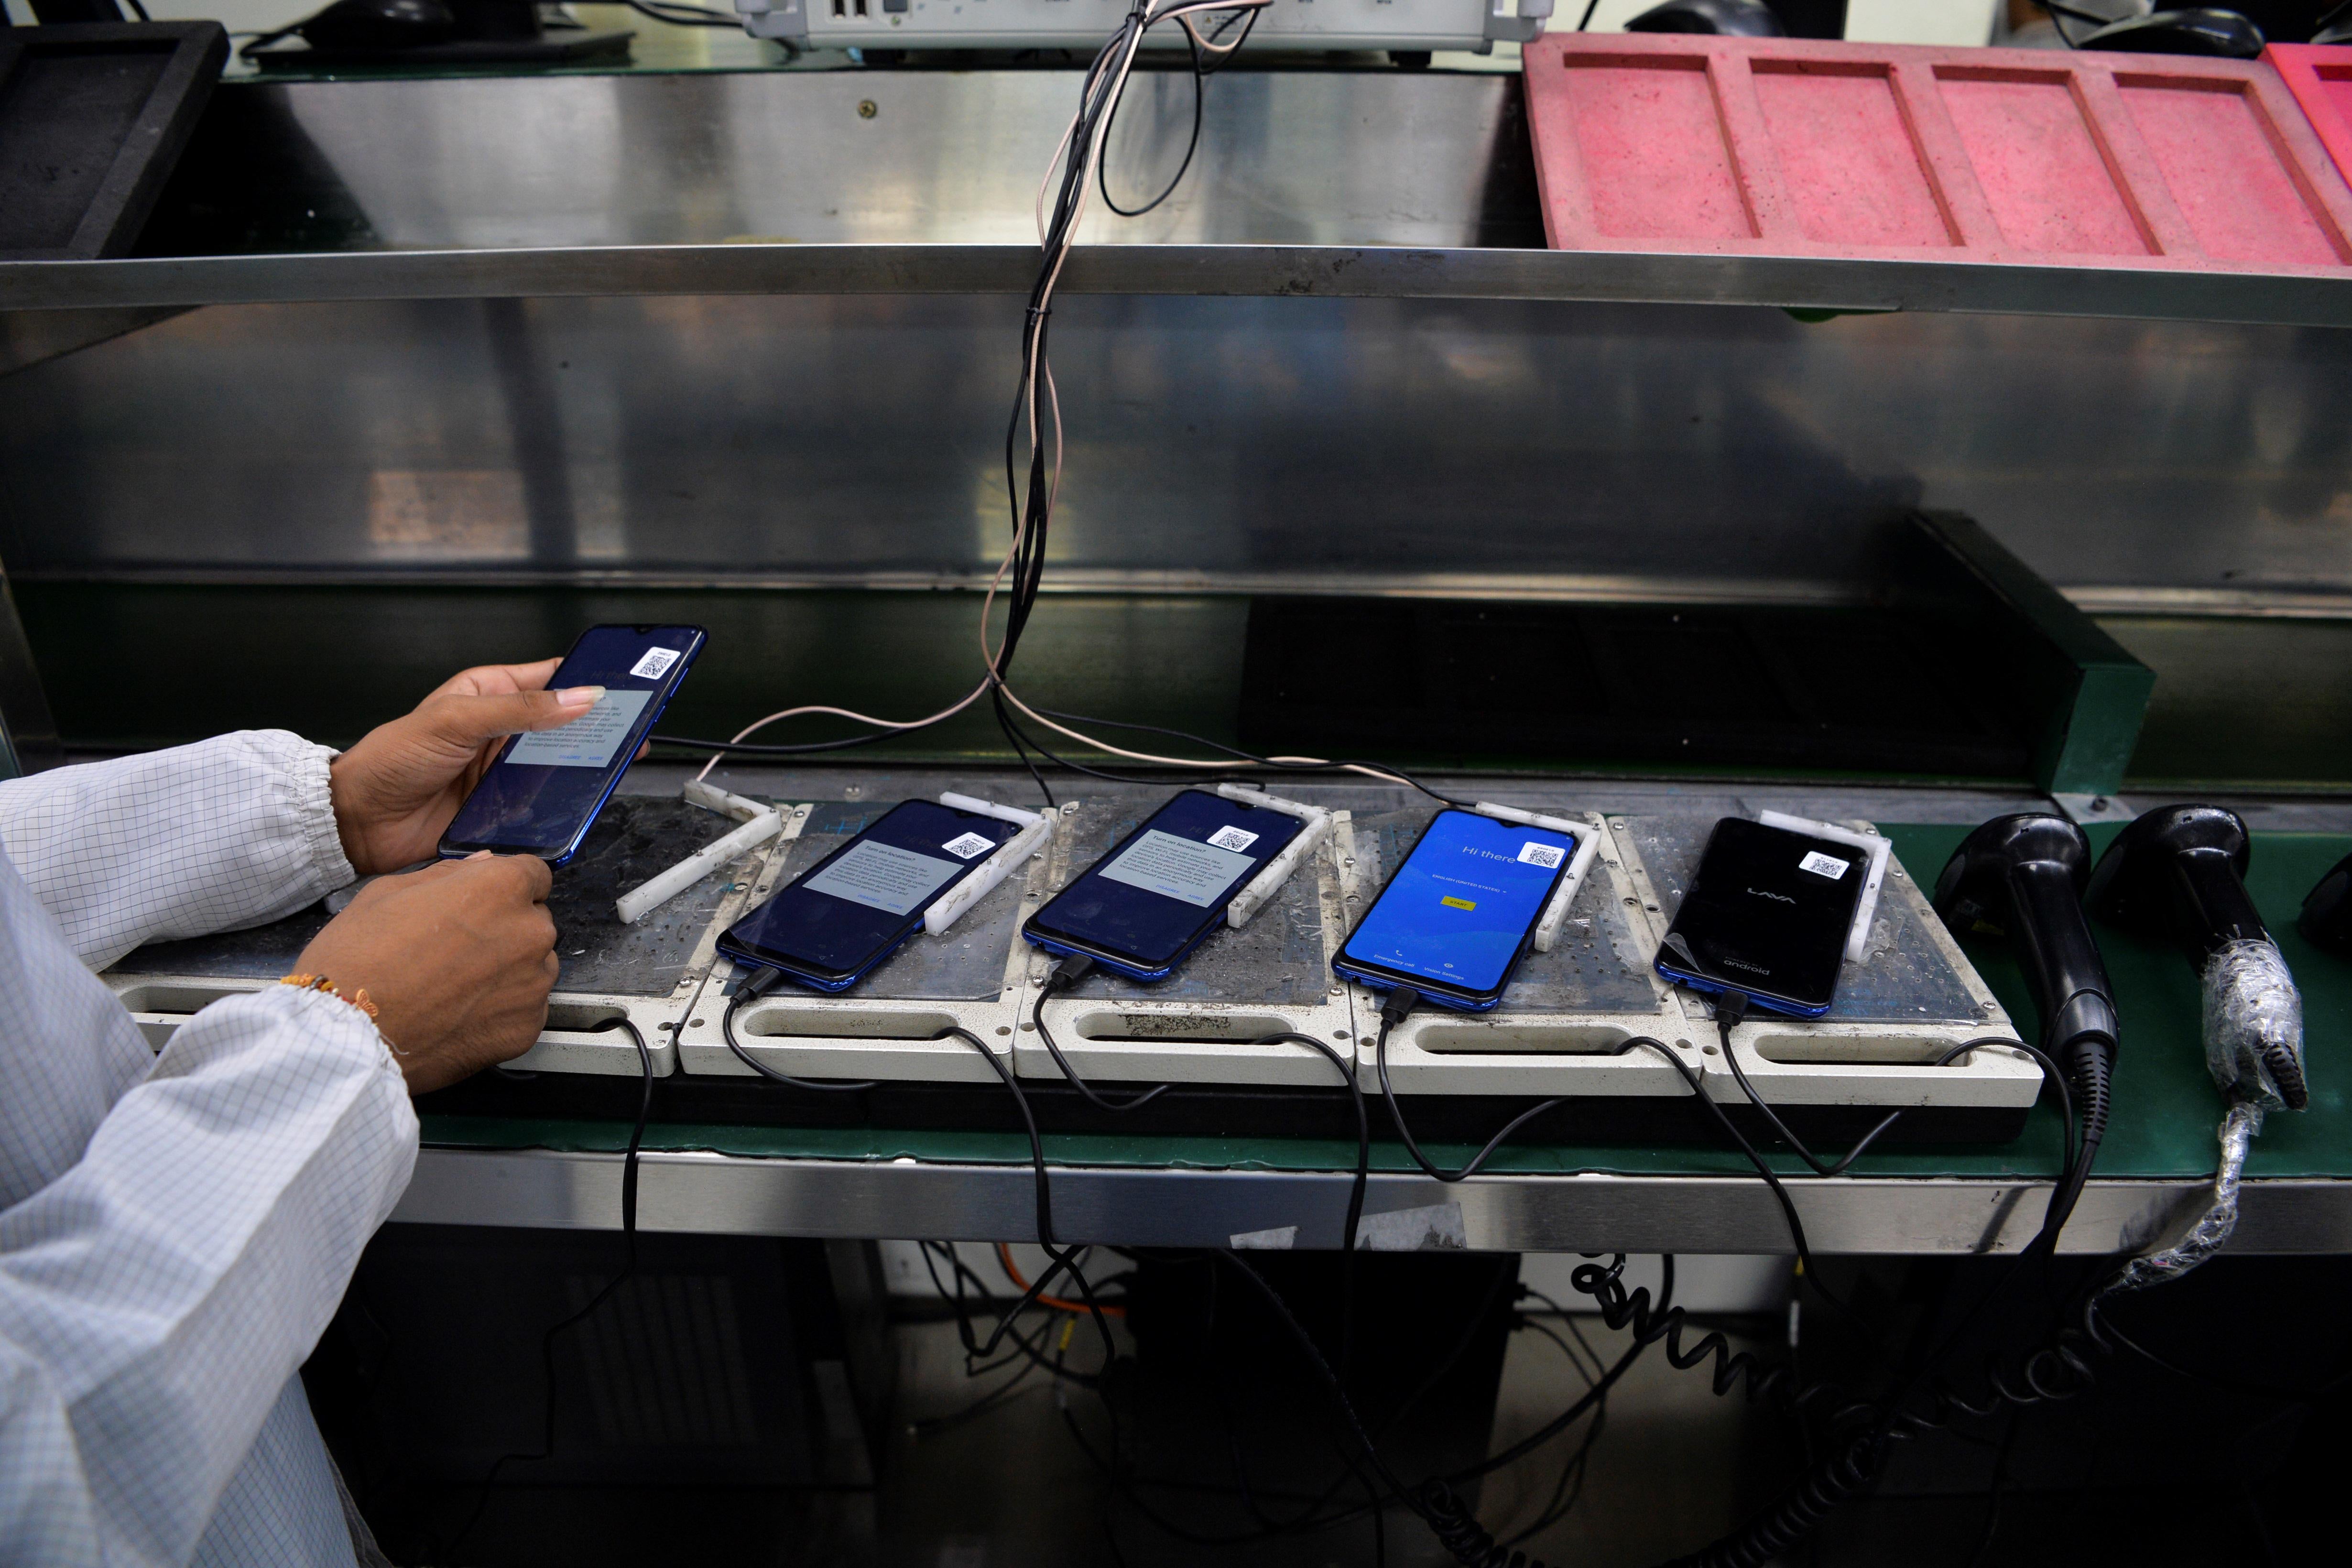 A worker assembles mobile phones at an Indian Lava phone manufacturer factory in Noida on August 22, 2019.